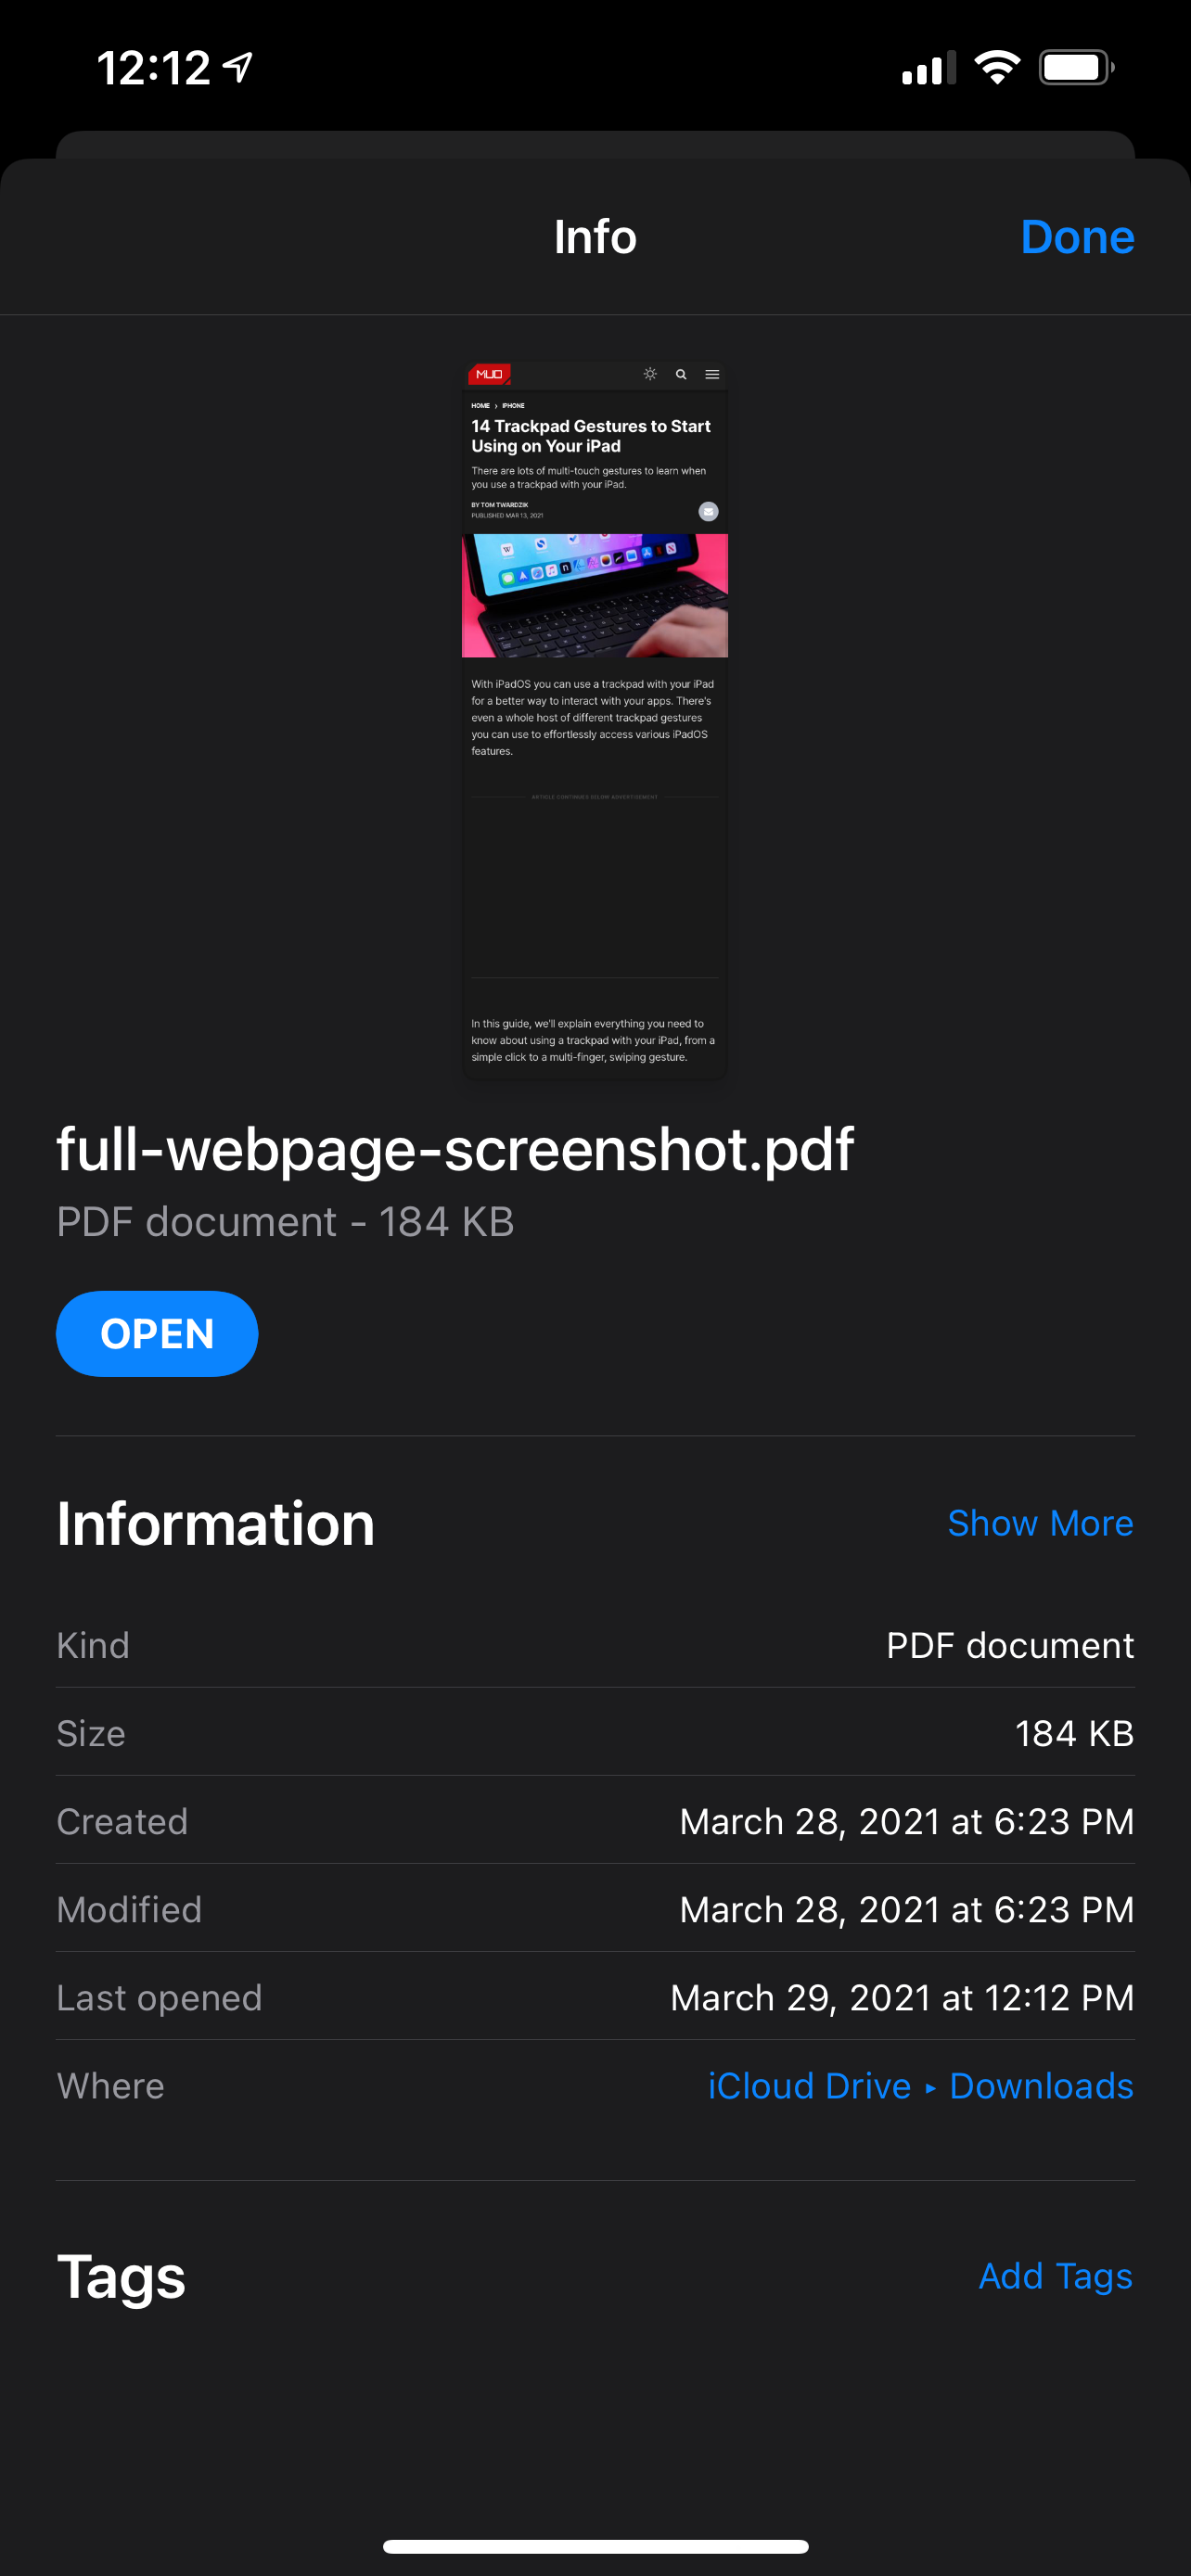 Viewing a full-page screenshot in Files.